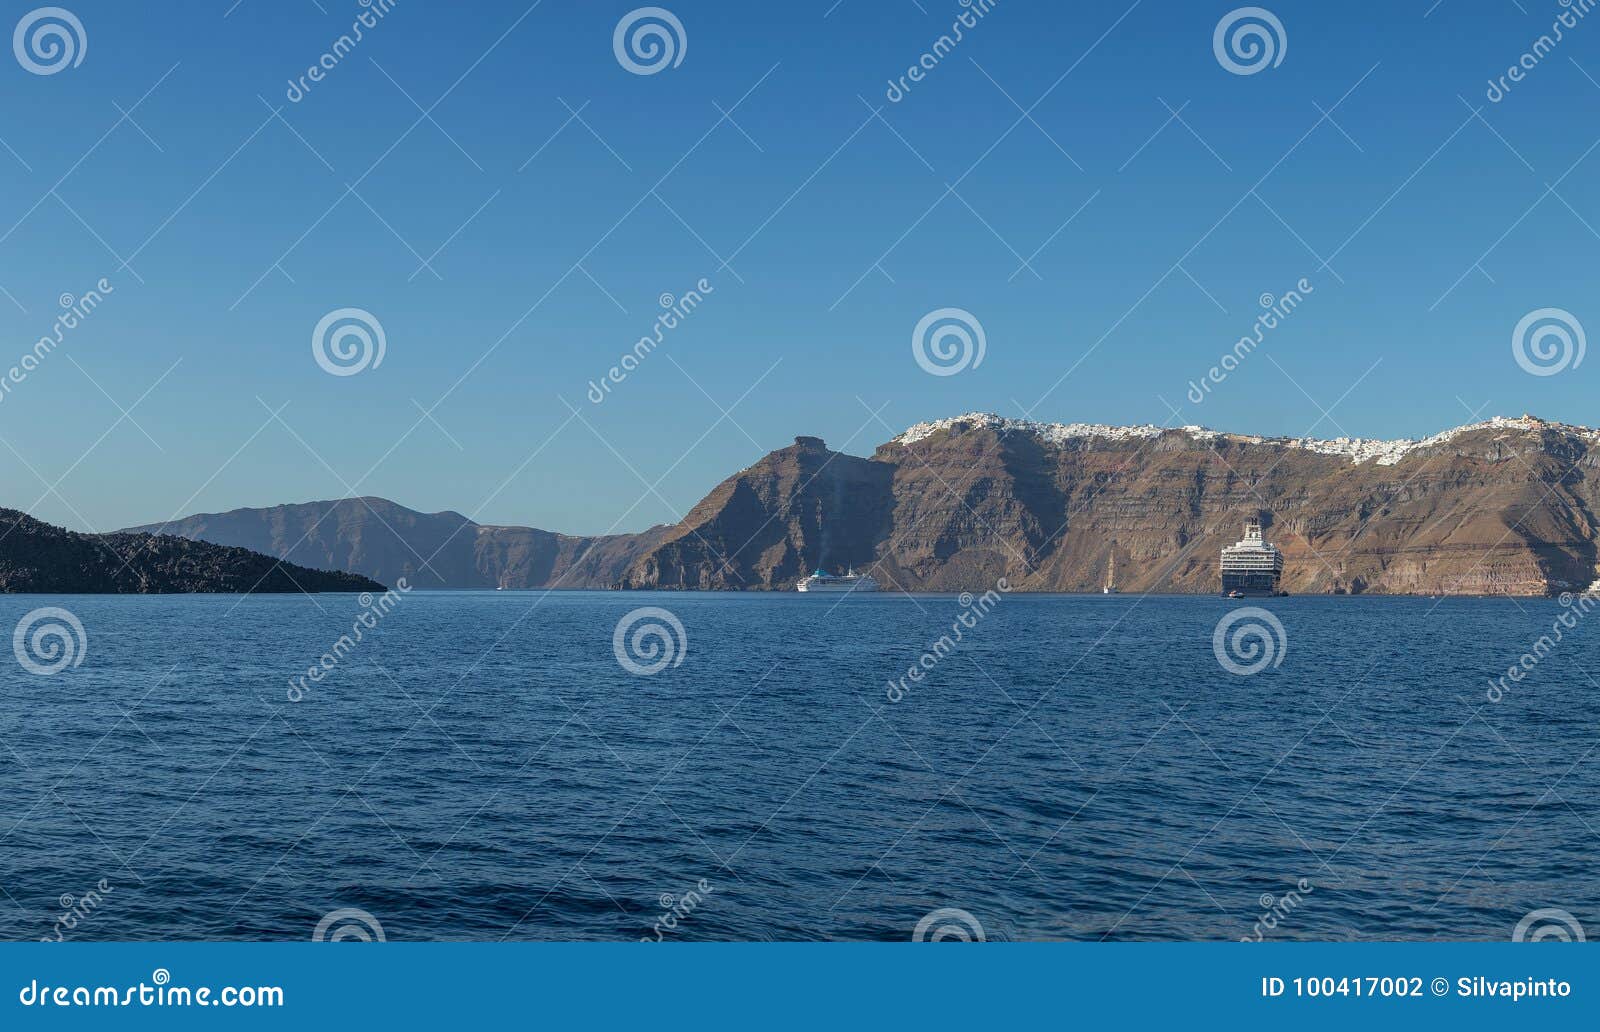 panoramica of fira, santorini view of the sea with cruises.